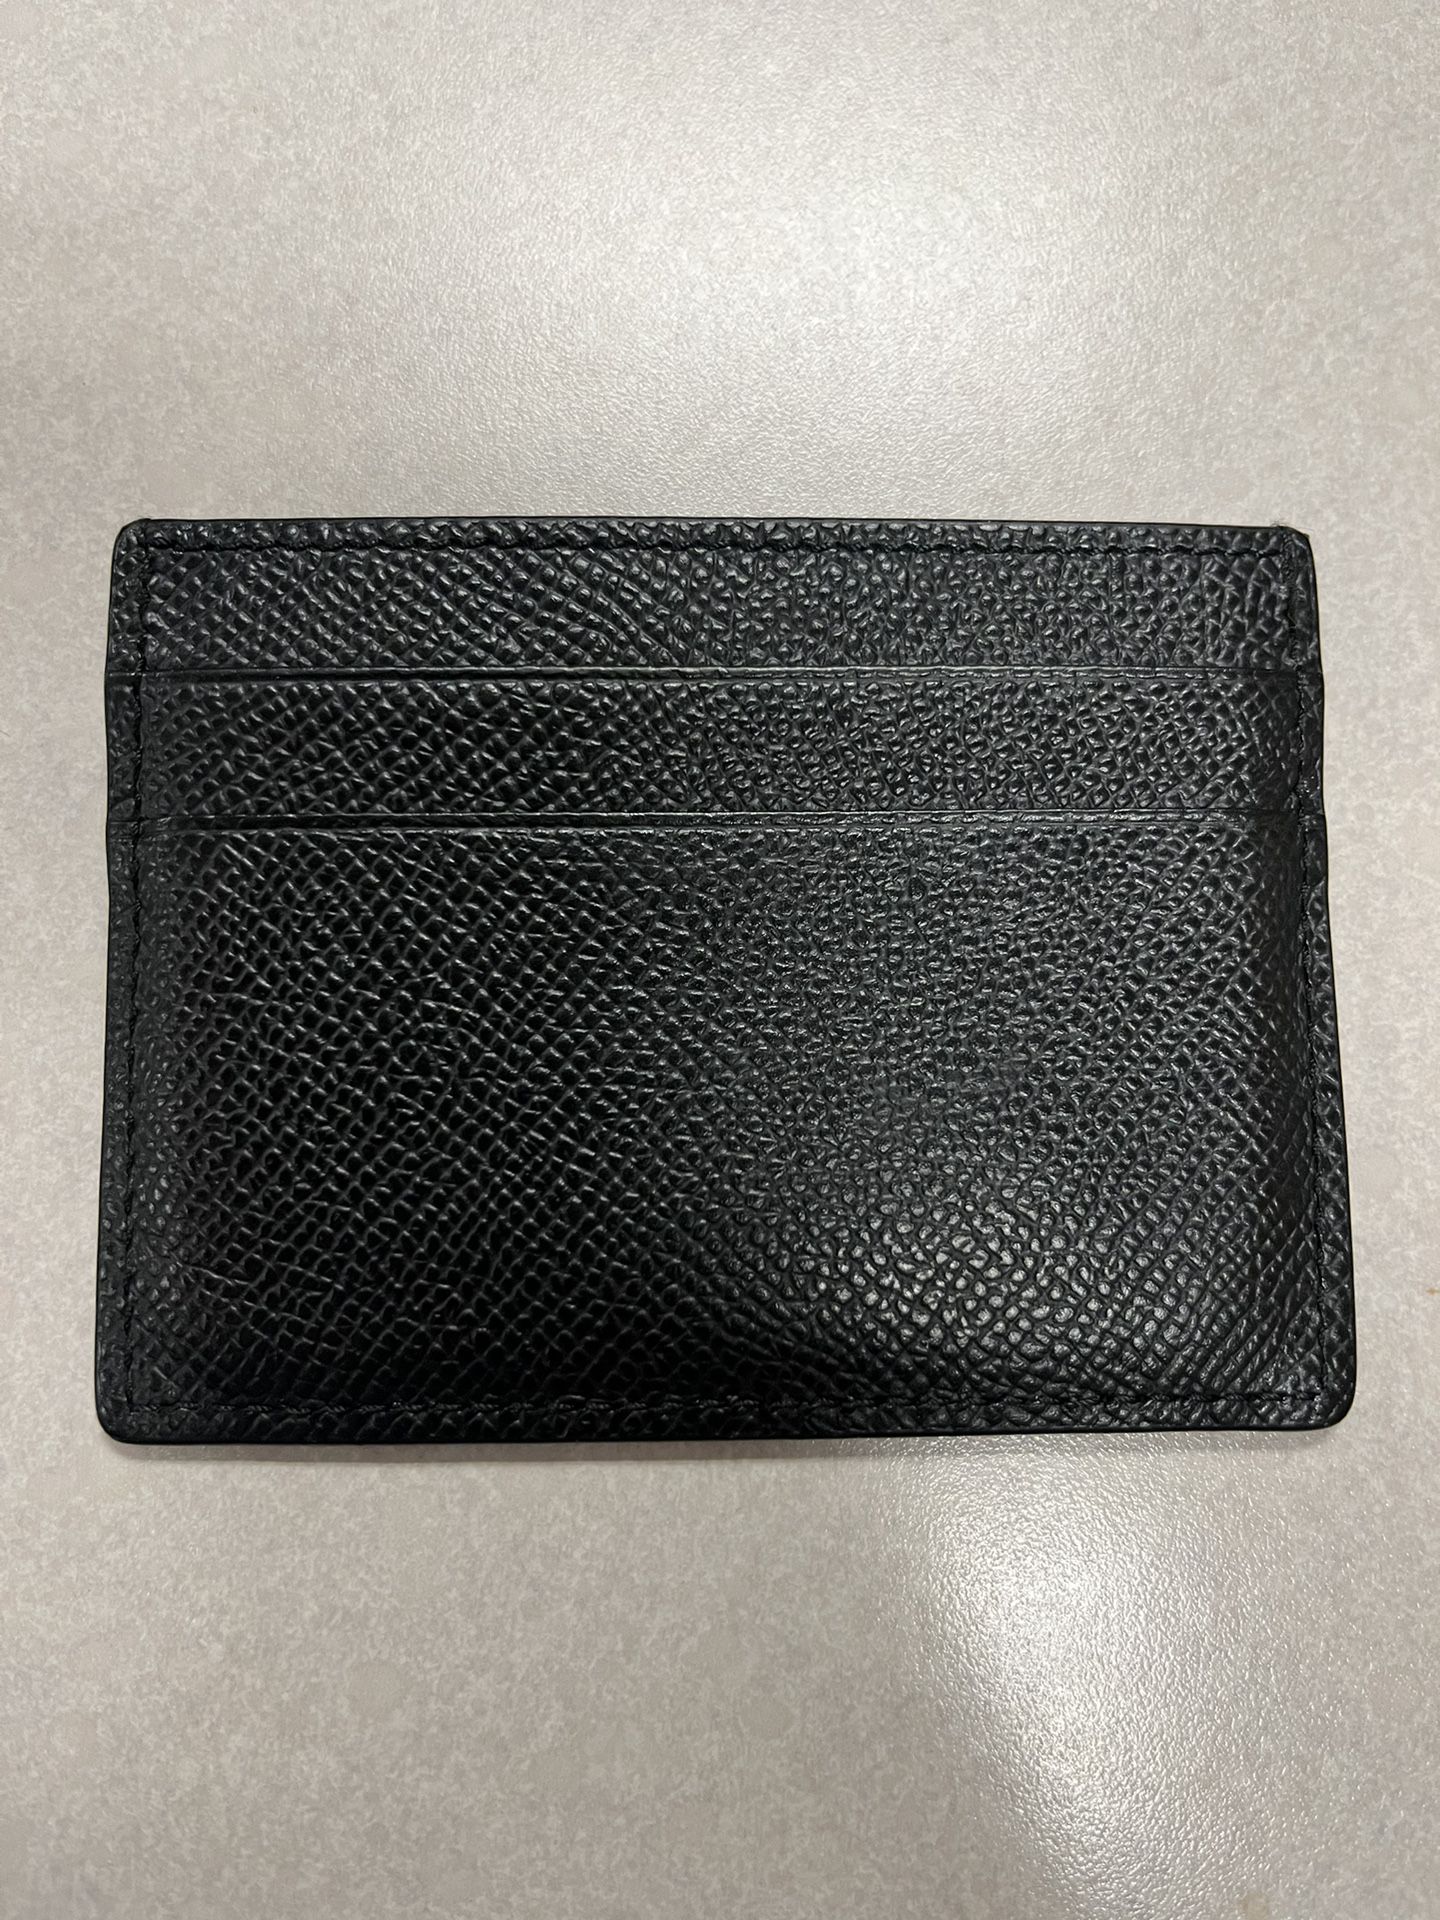 Burberry Card Holder for Sale in Palmdale, CA - OfferUp